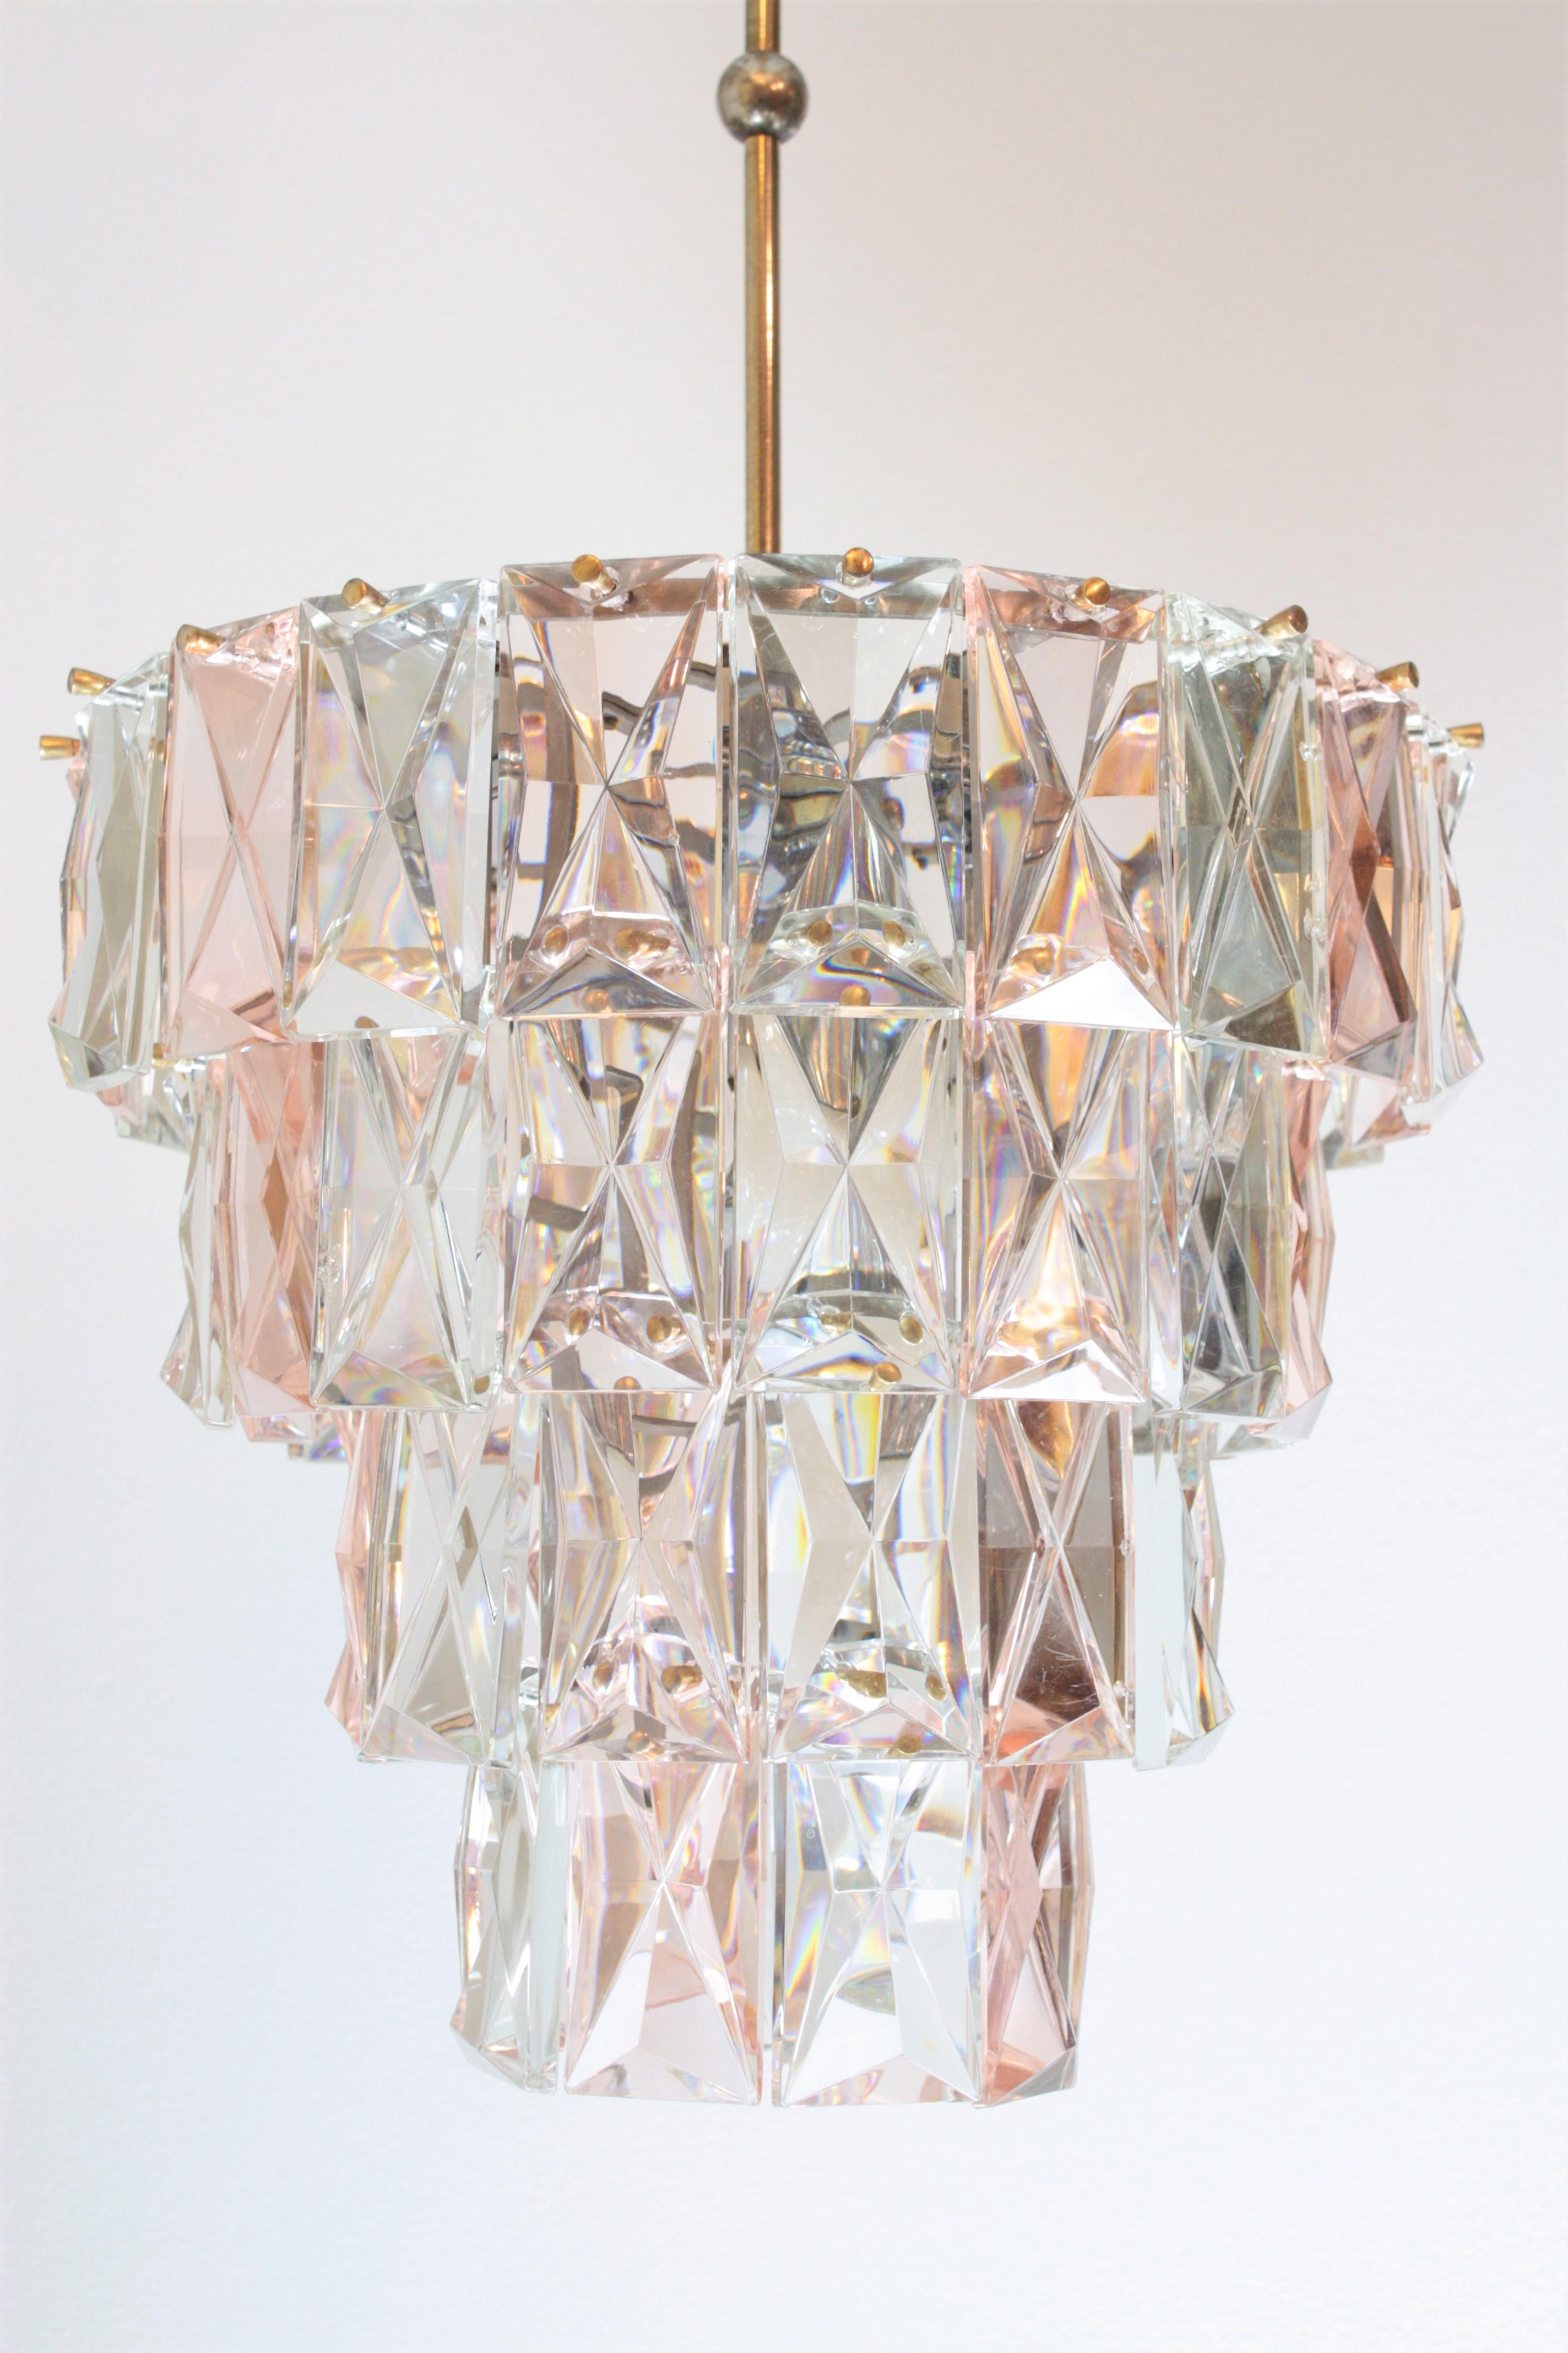 Mid-Century Modern Kinkeldey rectangular Prysm pink and clear crystal four-tier chandelier, Germany, 1960s.
Unusual pink and clear crystal Mid-Century Modern Kinkeldey chandelier: Four-tiers chandelier with deep faceted rectangular crystal prisms